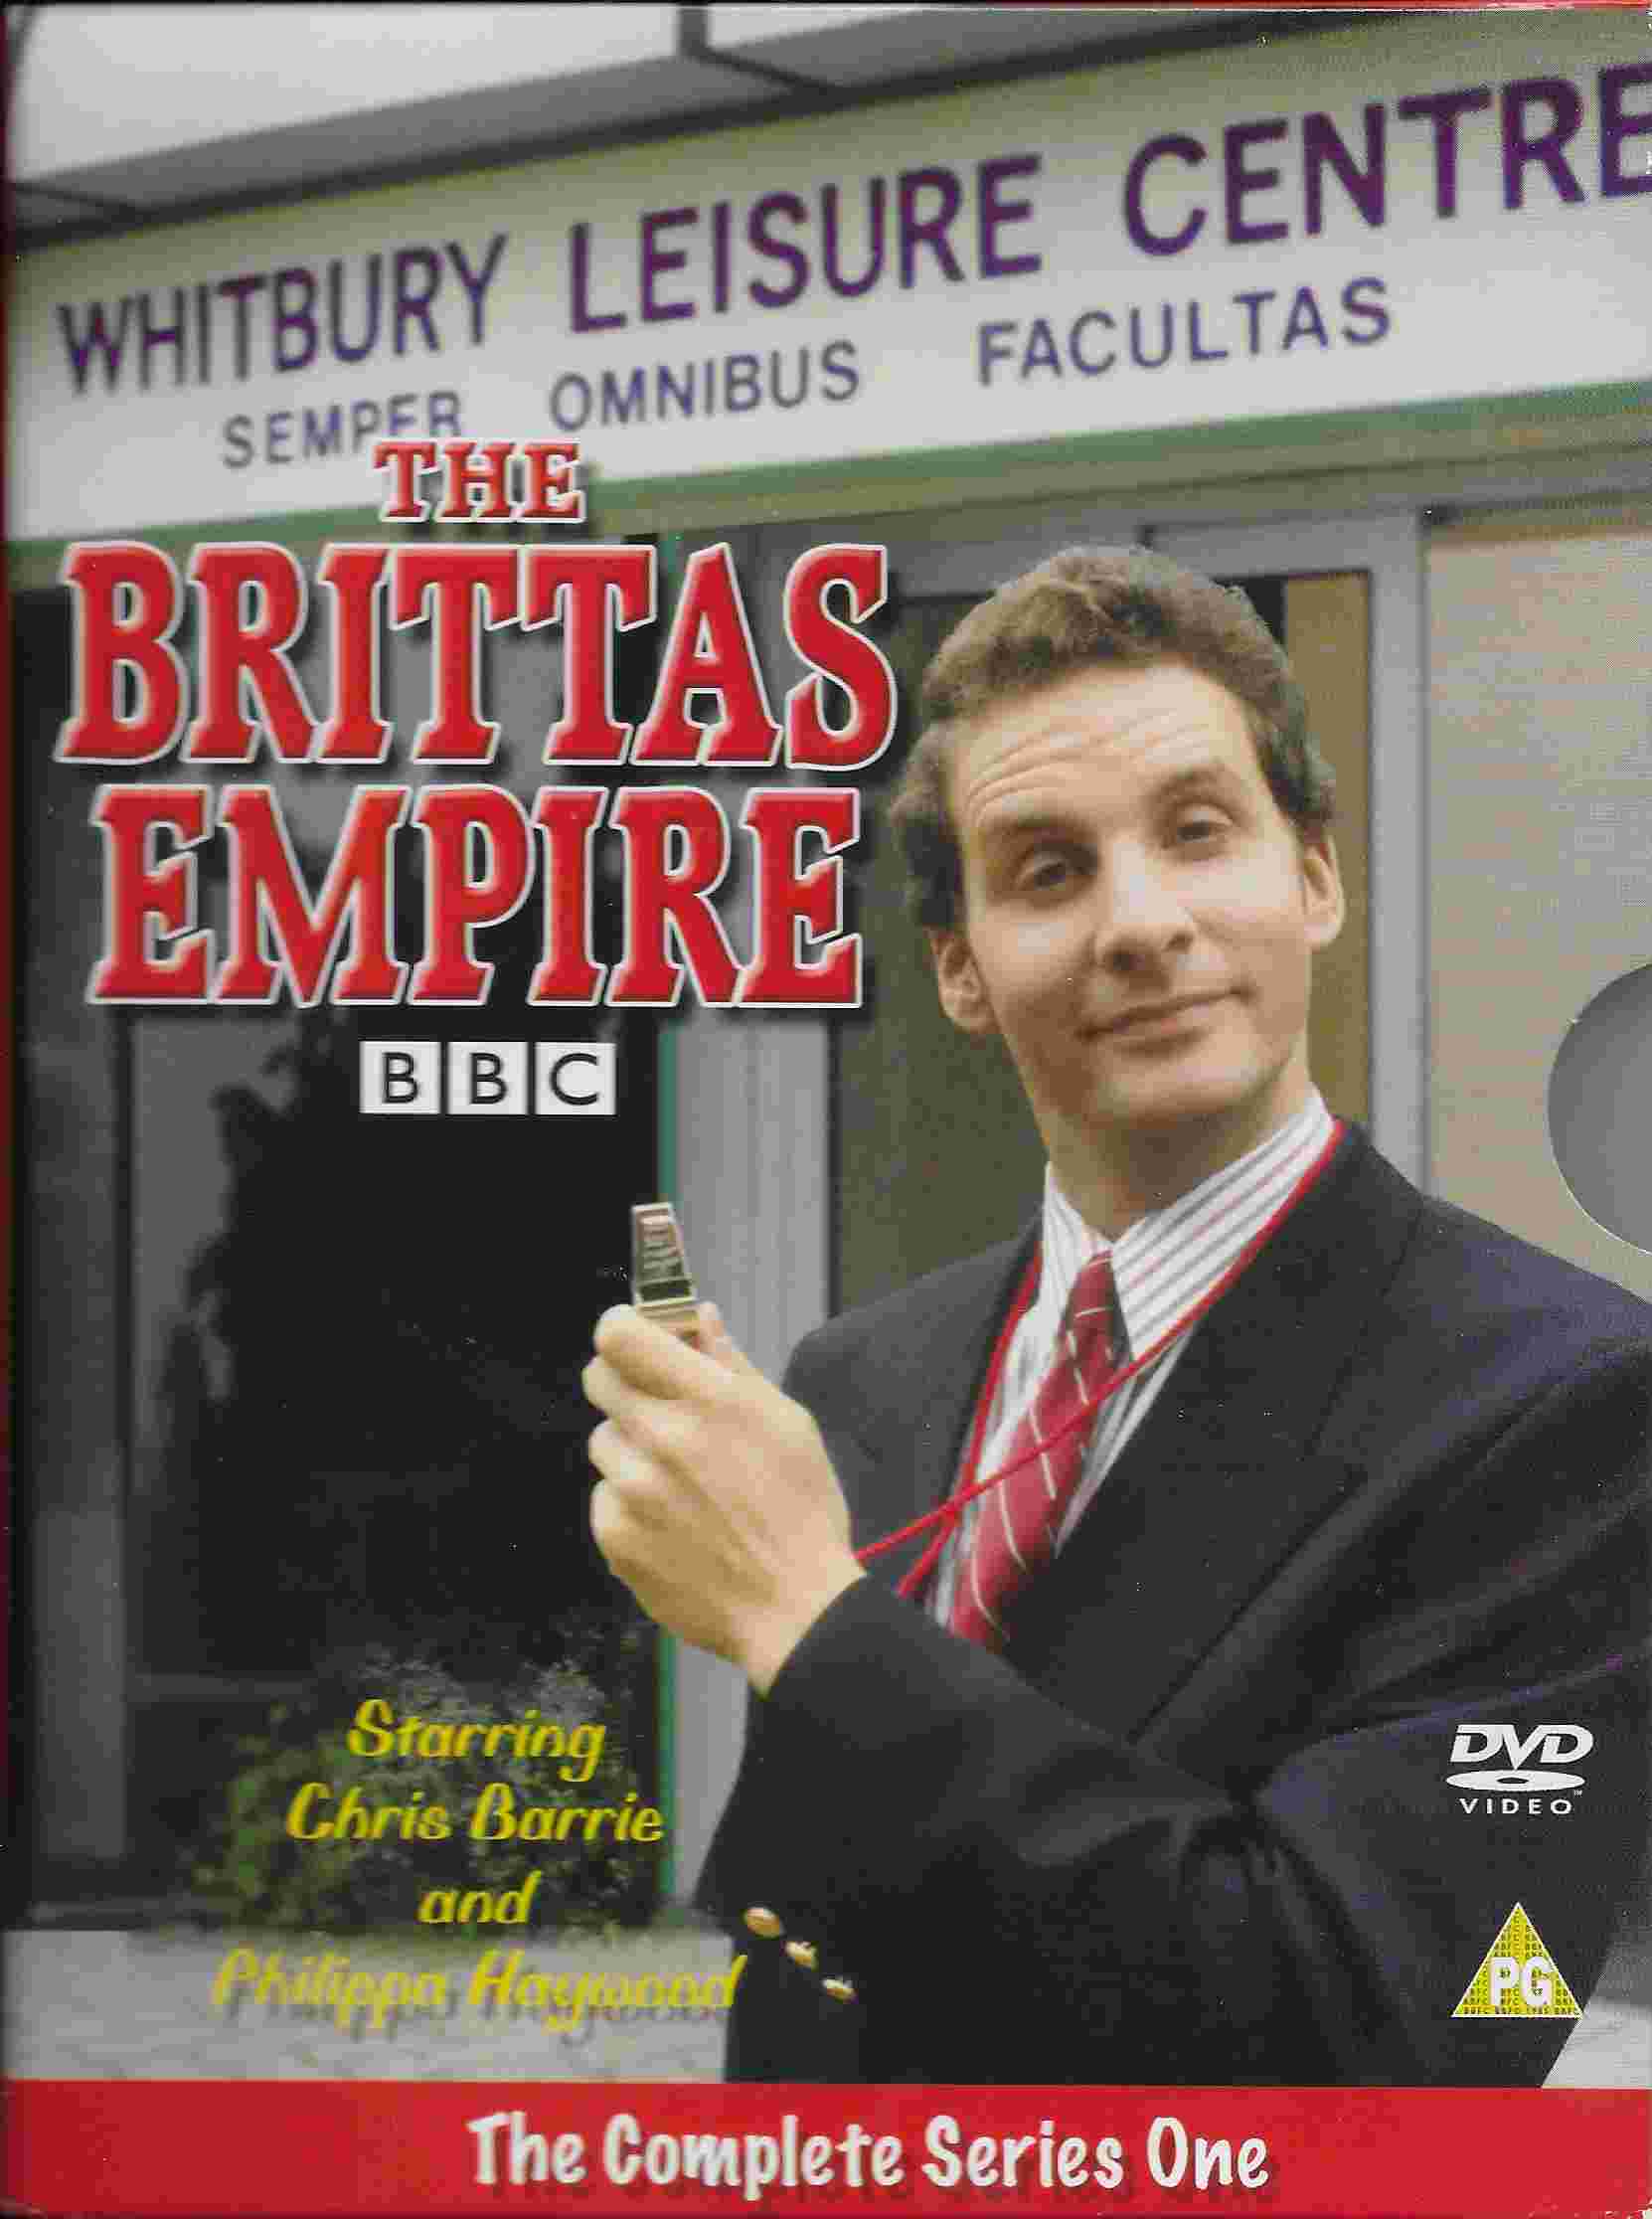 Picture of The Brittas empire - Series 1 by artist Richard Fegen / Andrew Norriss from the BBC dvds - Records and Tapes library